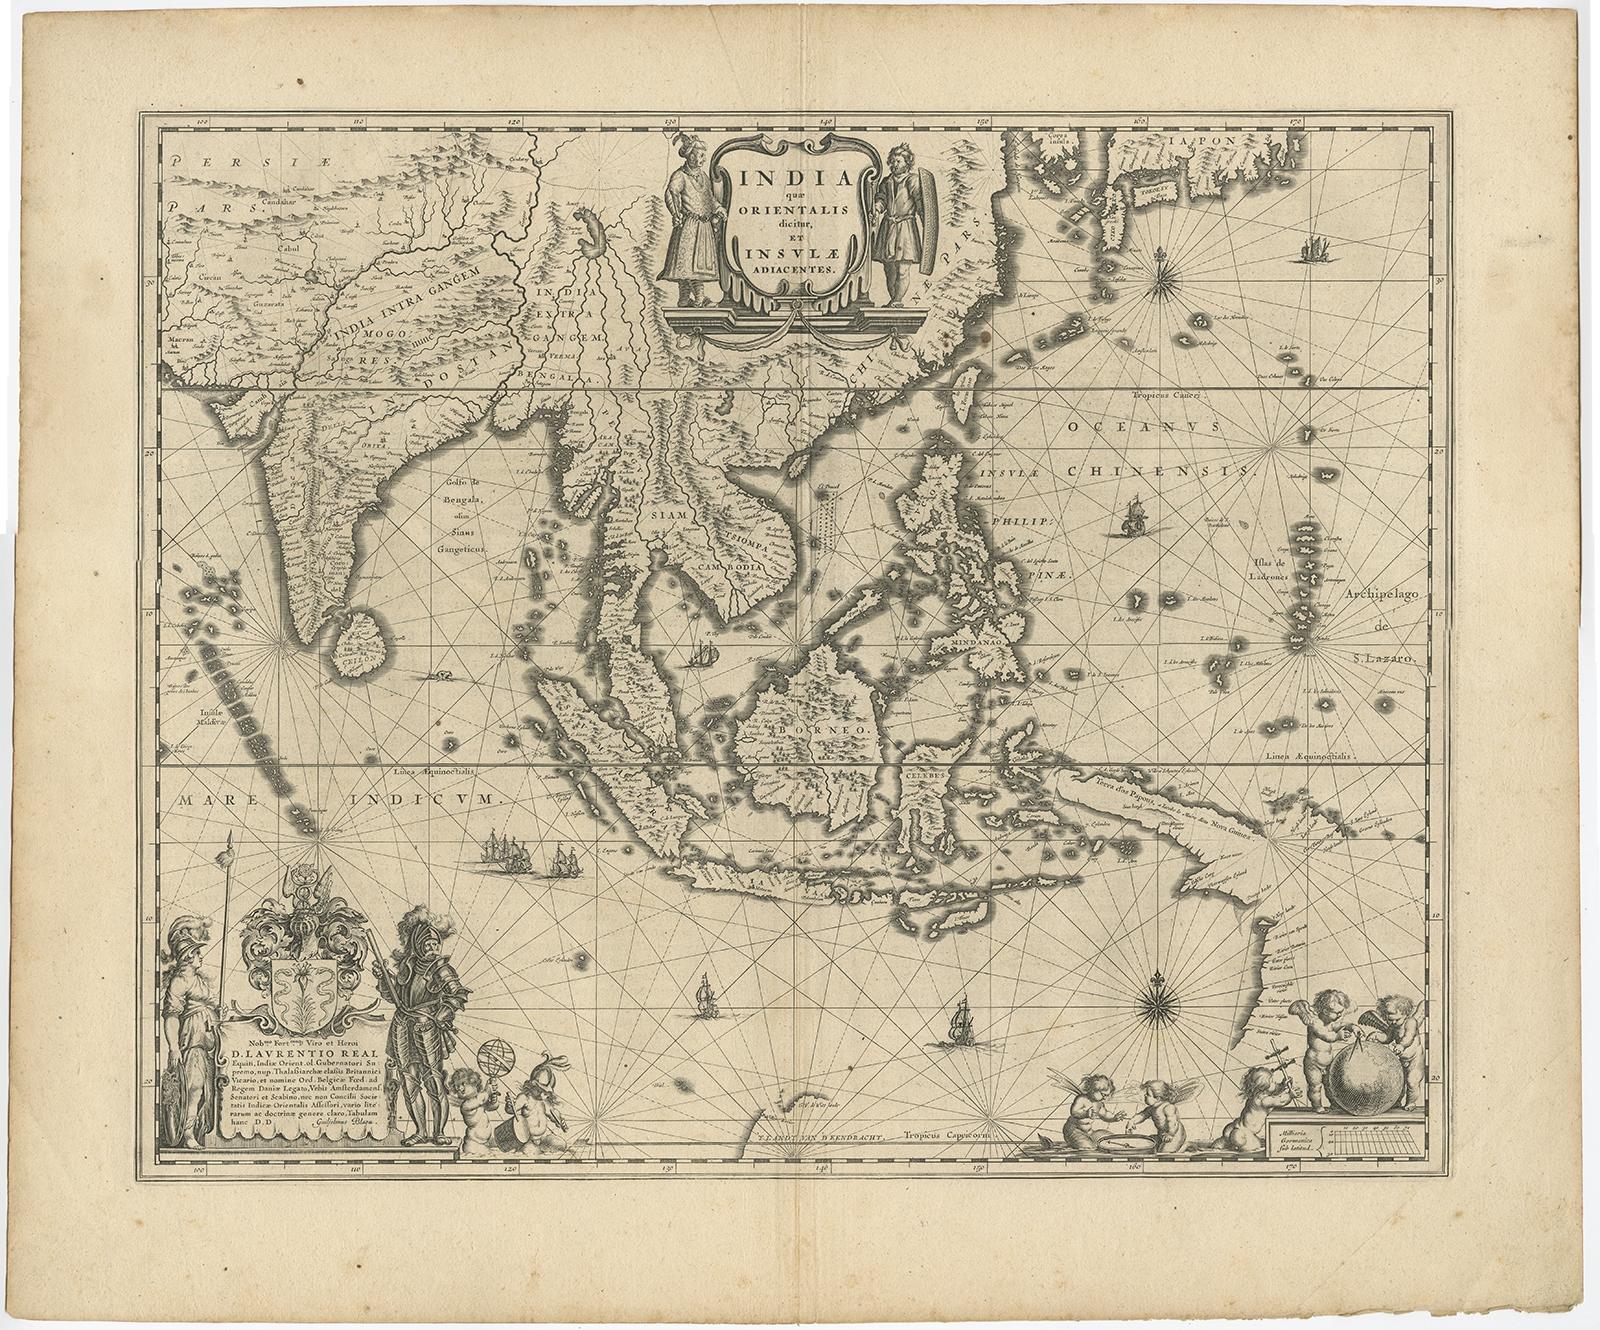 Antique map titled 'India quae Orientalis dicitur et Insulae adiacentes'. 

Map of Southeast Asia, extending from India to Tibet to Japan to New Guinea. This map is one of the first to show a number of the early Dutch discoveries in